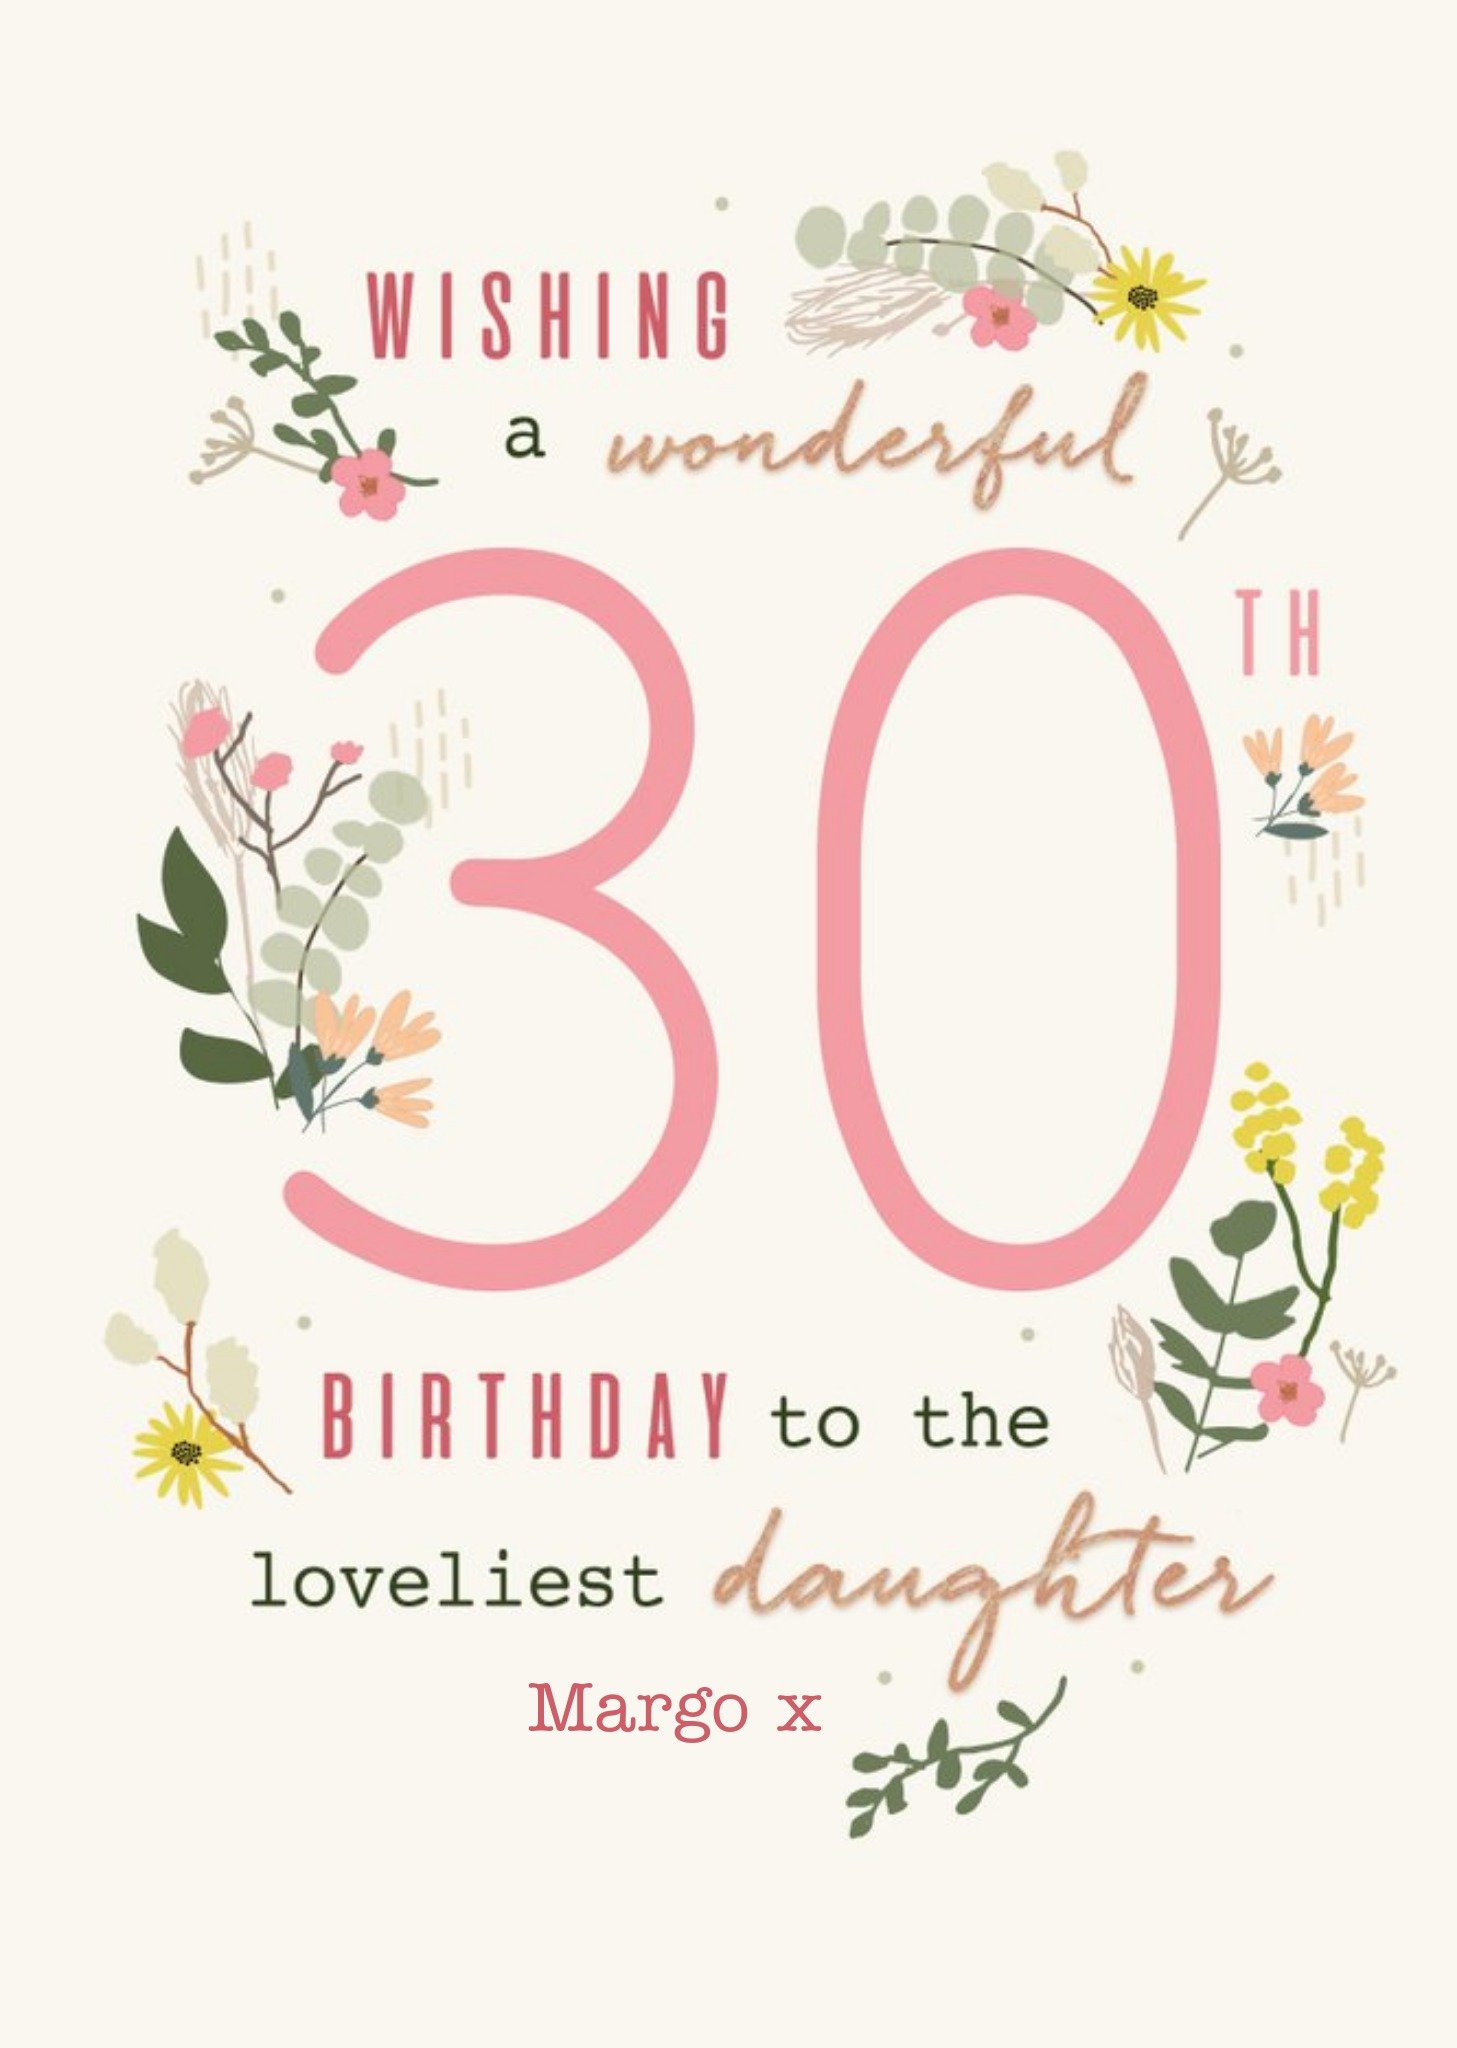 Moonpig Wishing A Wonderful 30th Birthday To the Loveliest Daughter Floral Birthday Card, Large